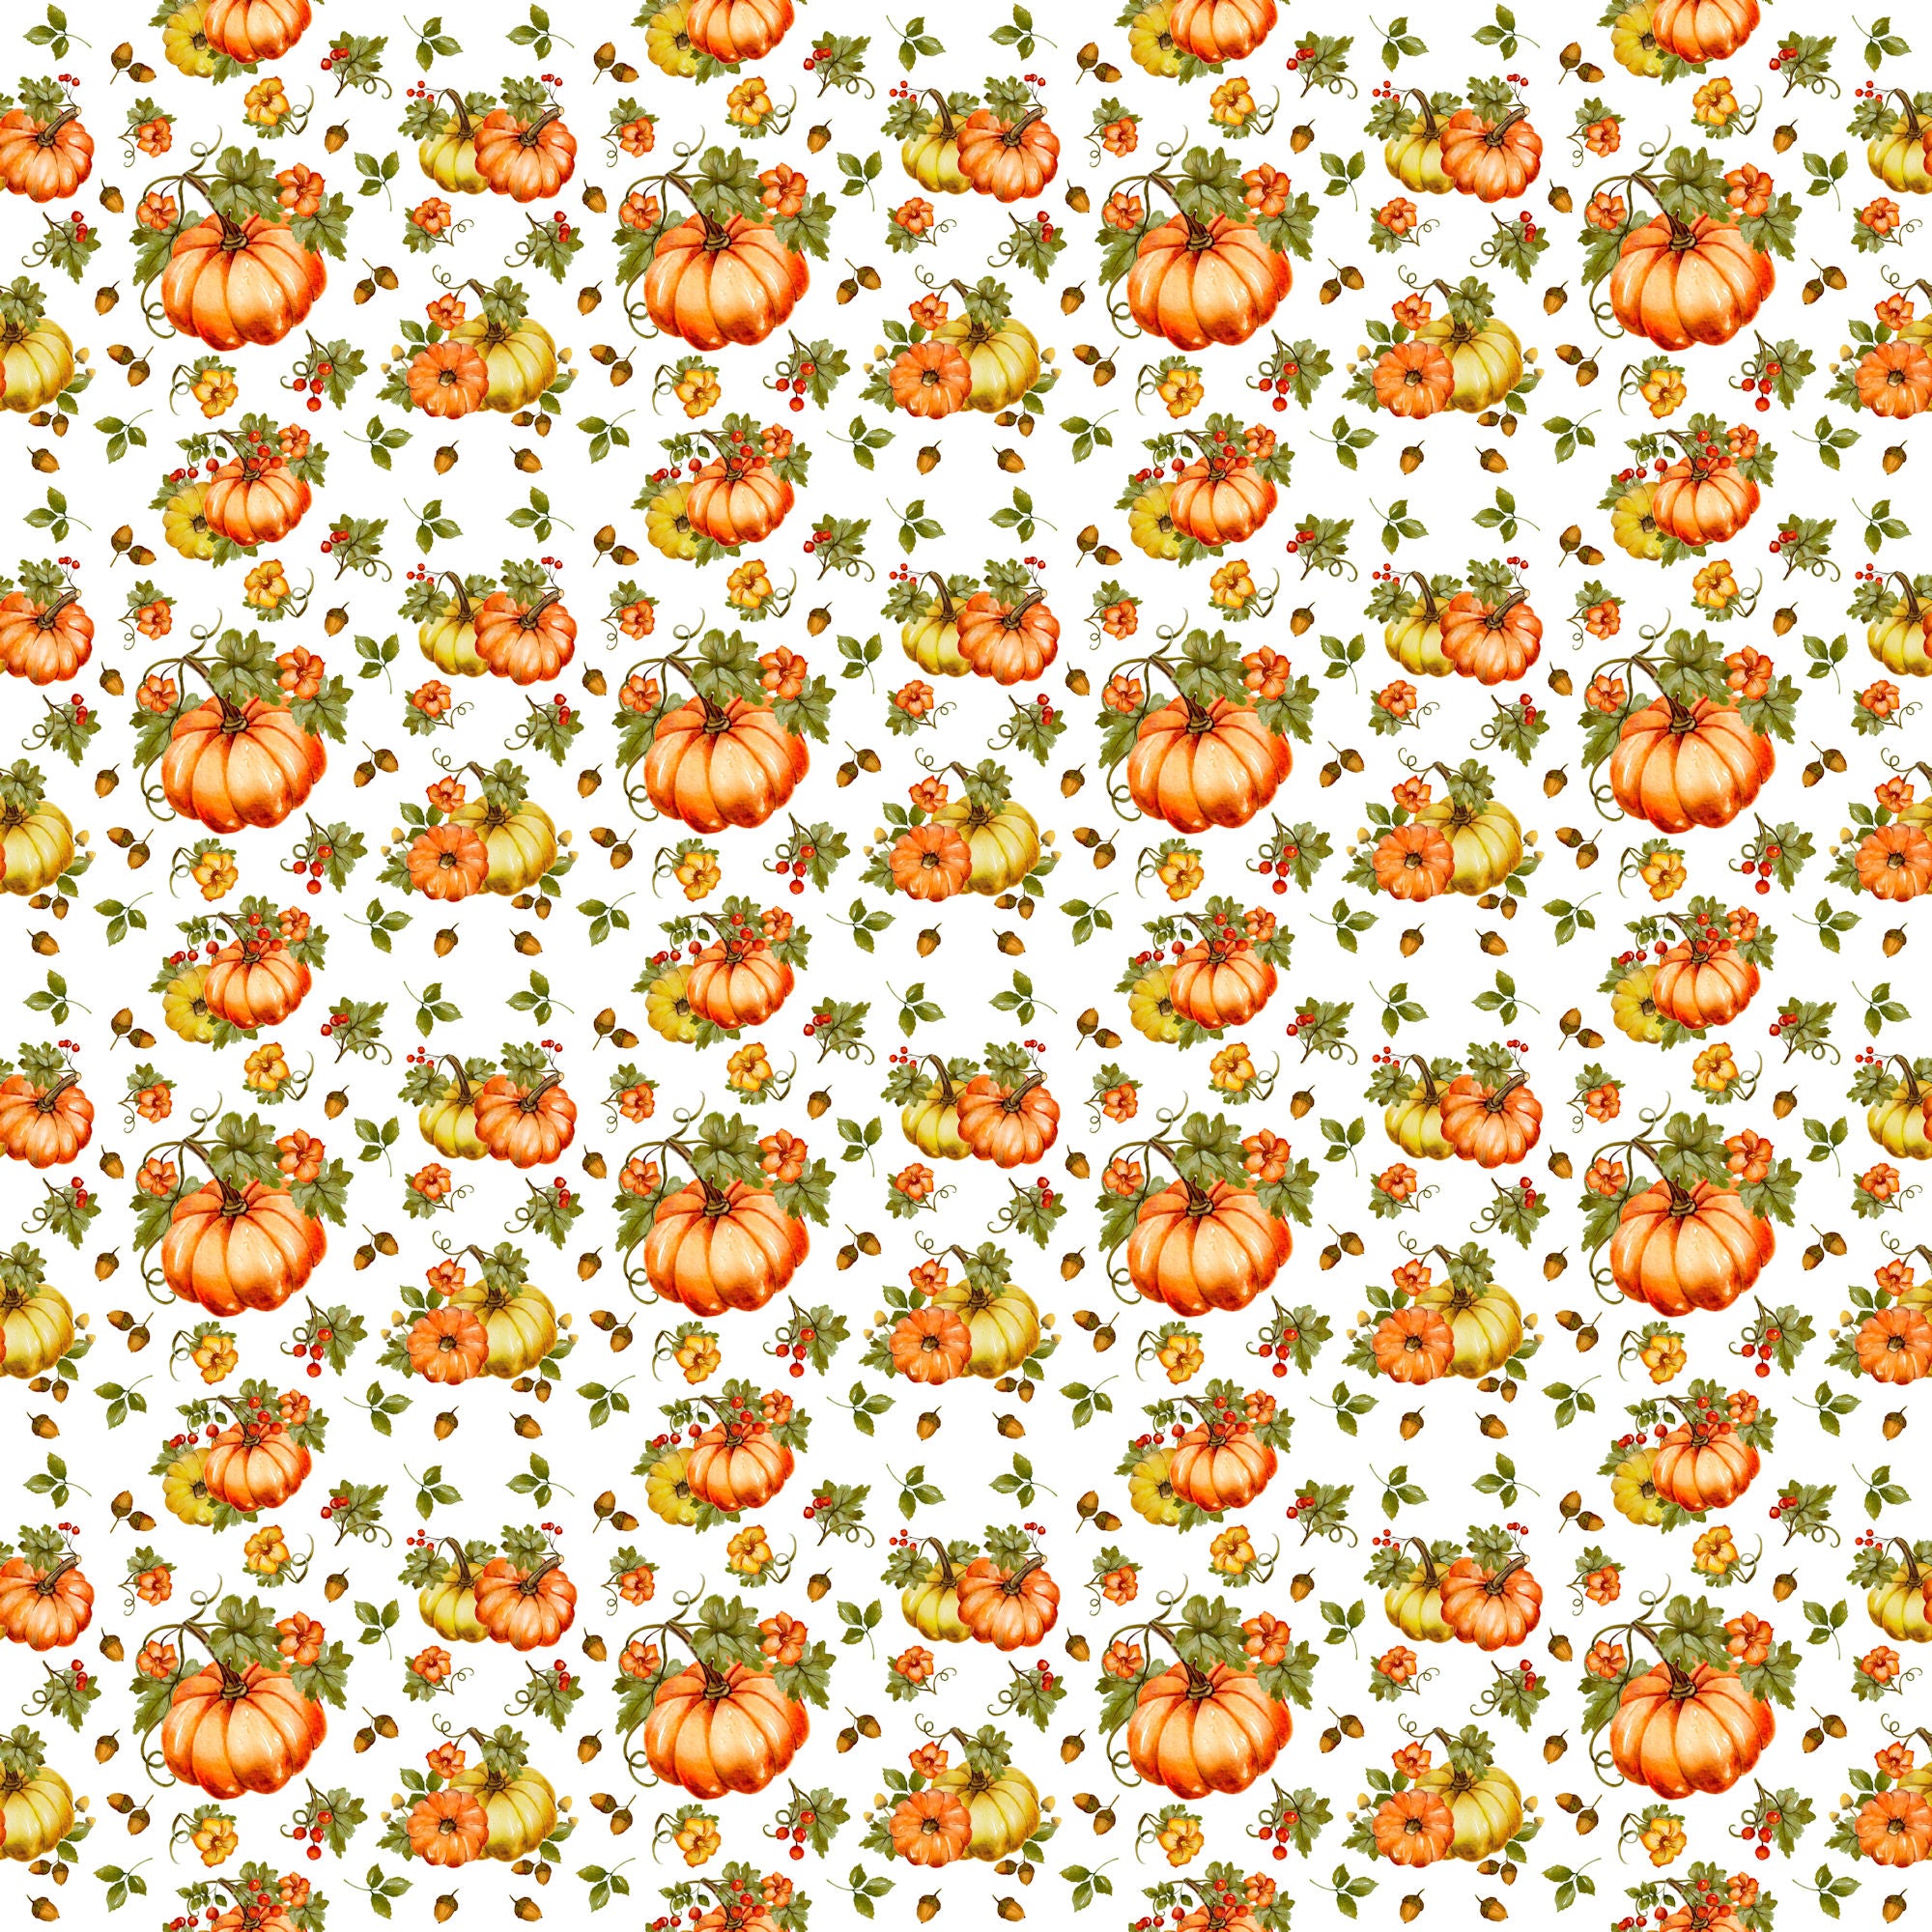 Favorite Fall Collection Plenty of Pumpkins 12 x 12 Double-Sided Scrapbook Paper by SSC Designs